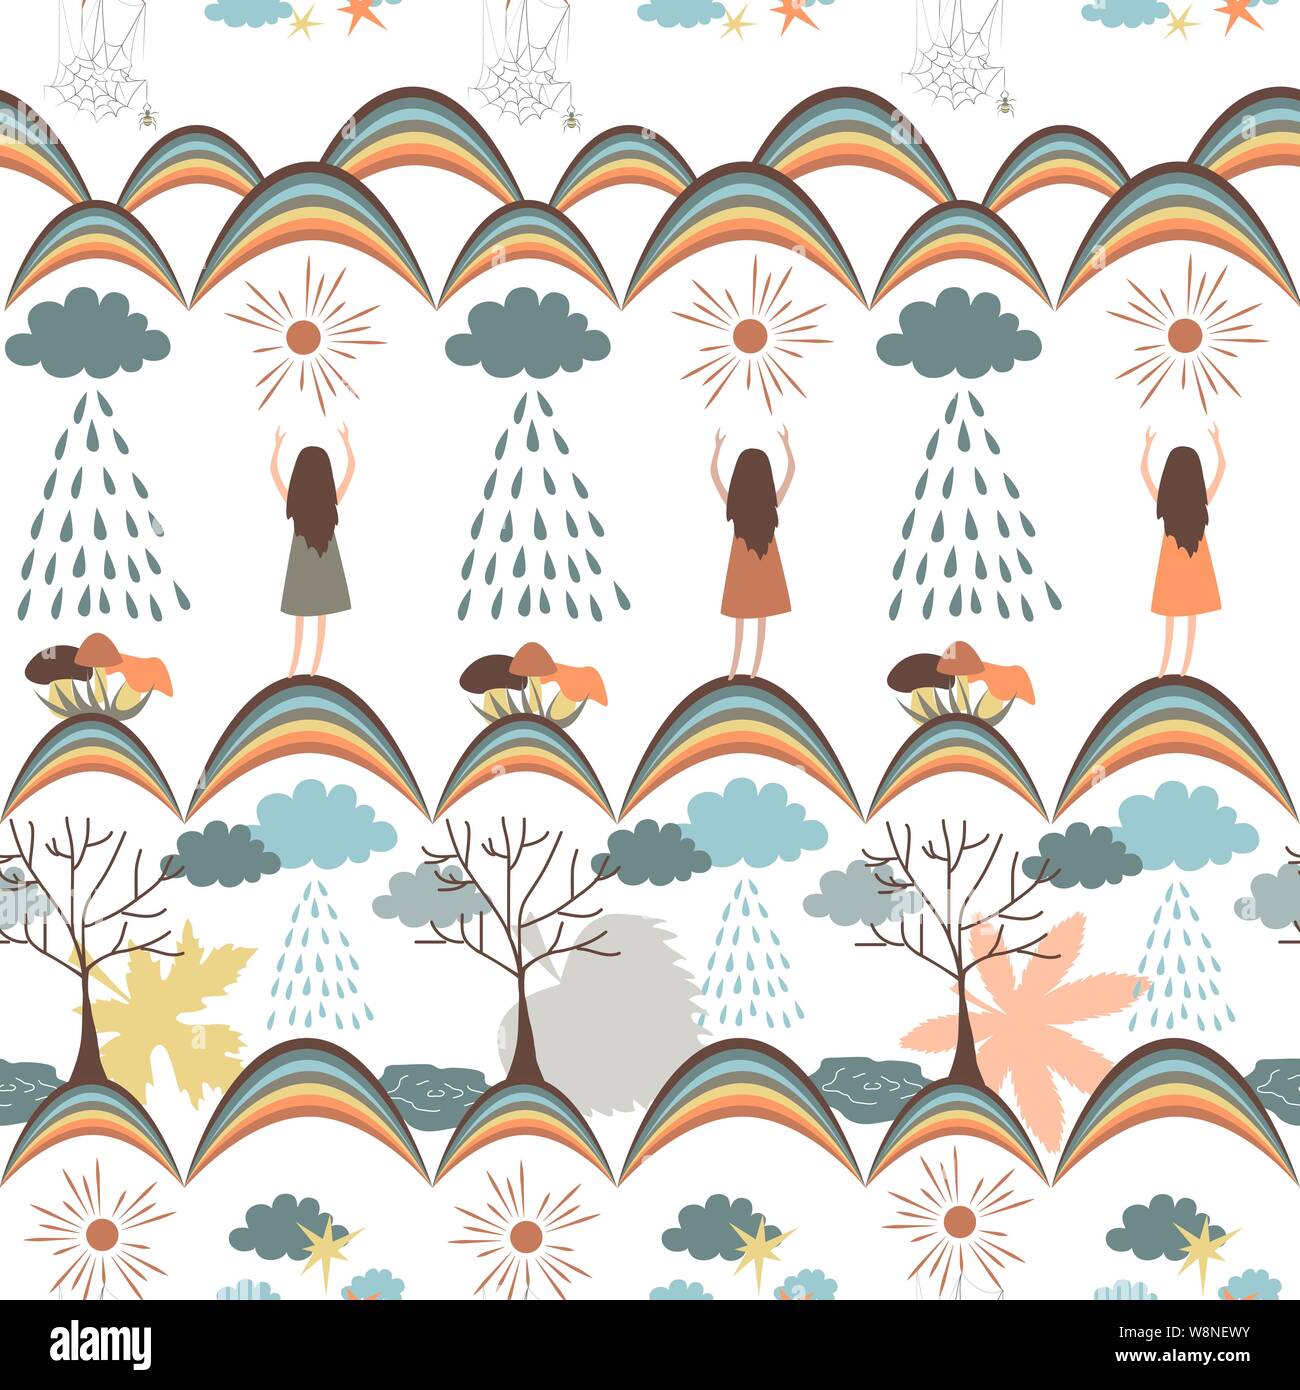 Autumn seamless pattern. Tribal vector backround with rainy clouds, rainbows, girls, rainy clouds, suns, trees, and mushrooms. Stock Vector